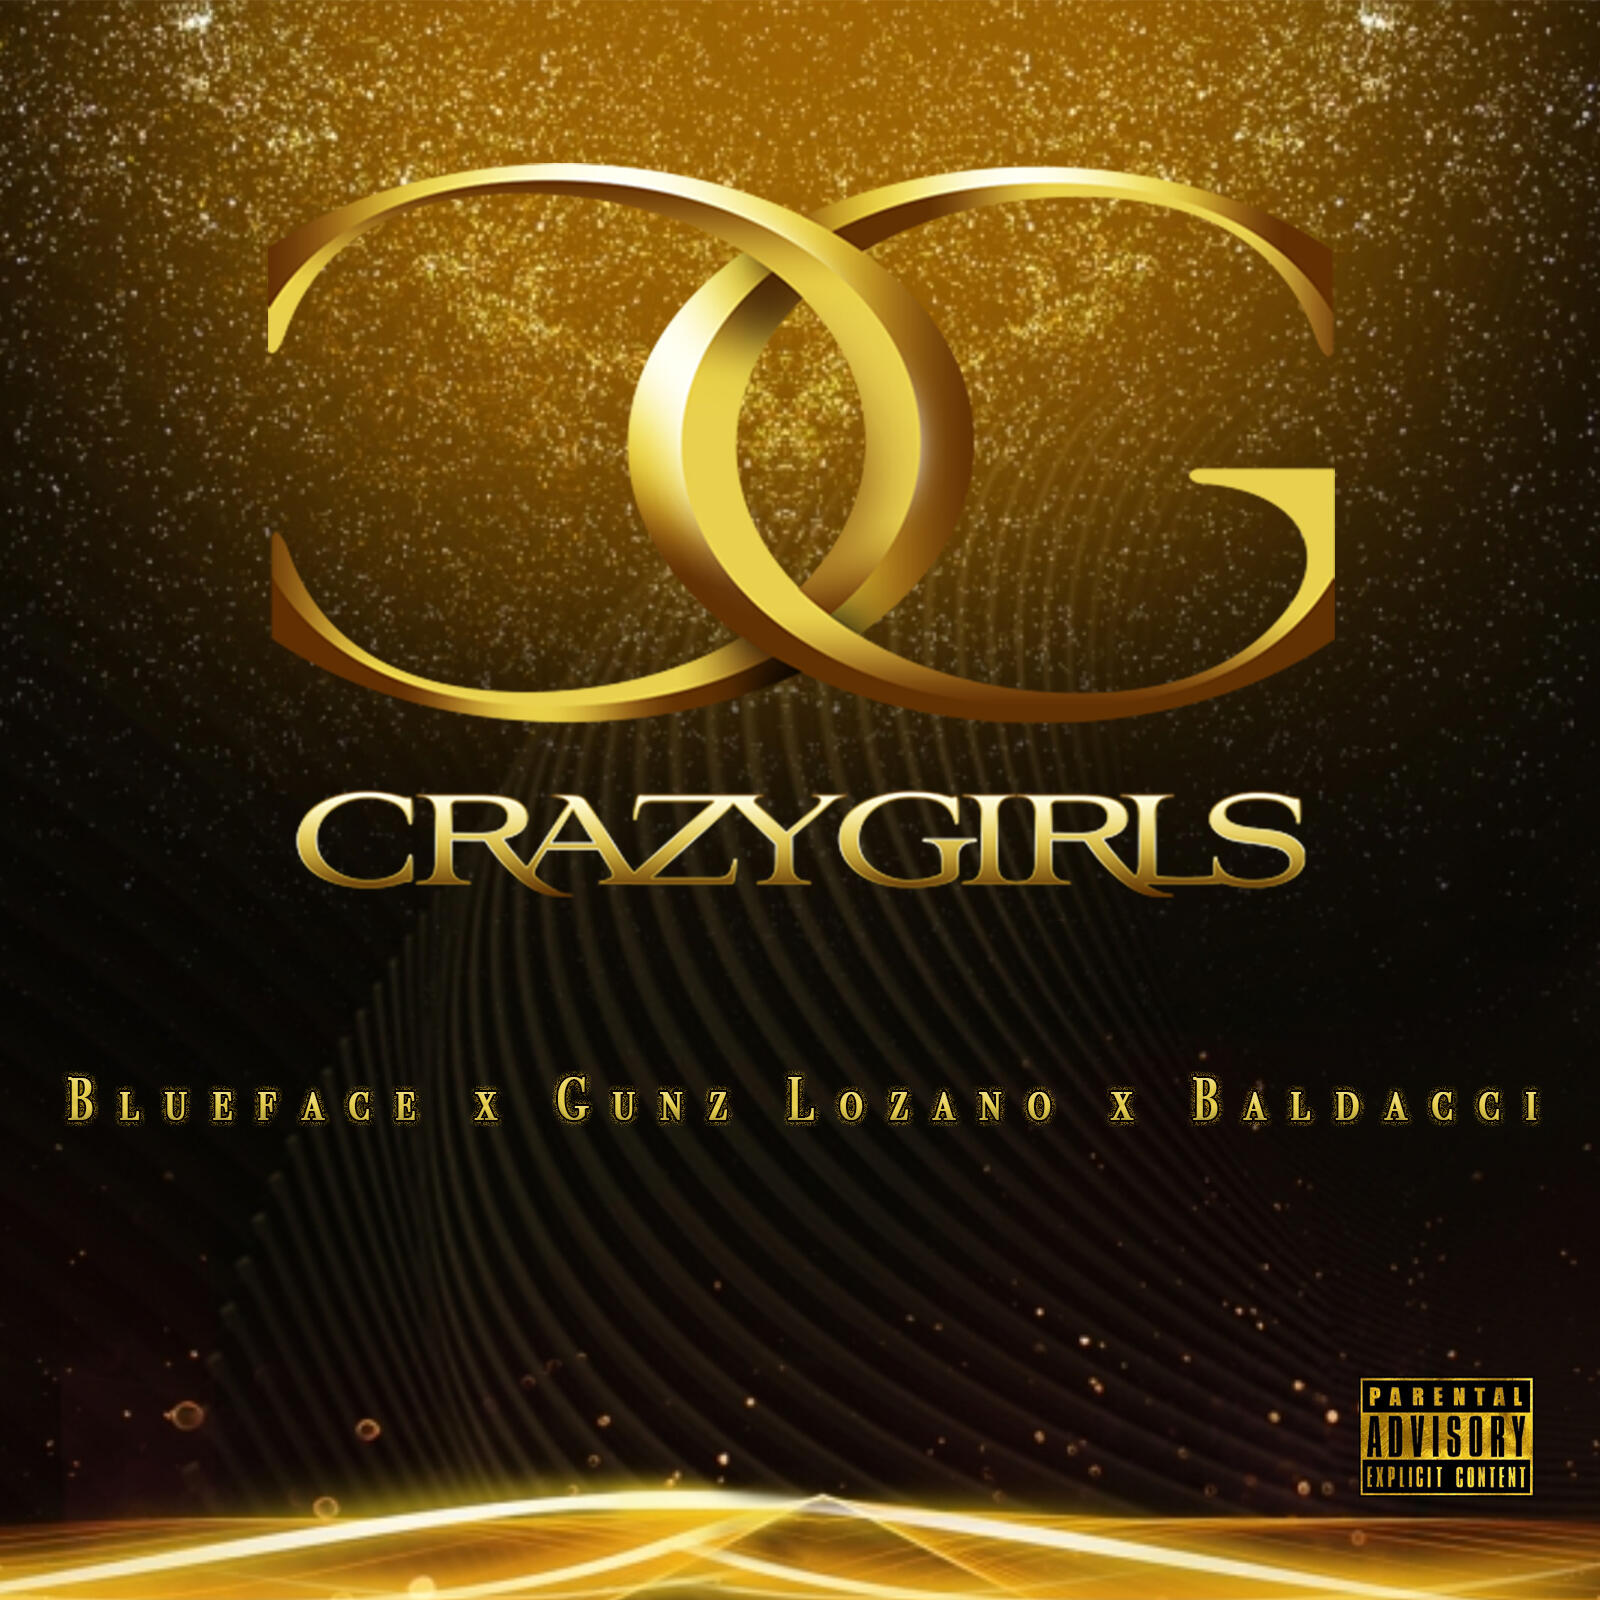 Listen Free To Blueface Crazy Girls Radio On Iheartradio Iheartradio - roblox id code for blueface